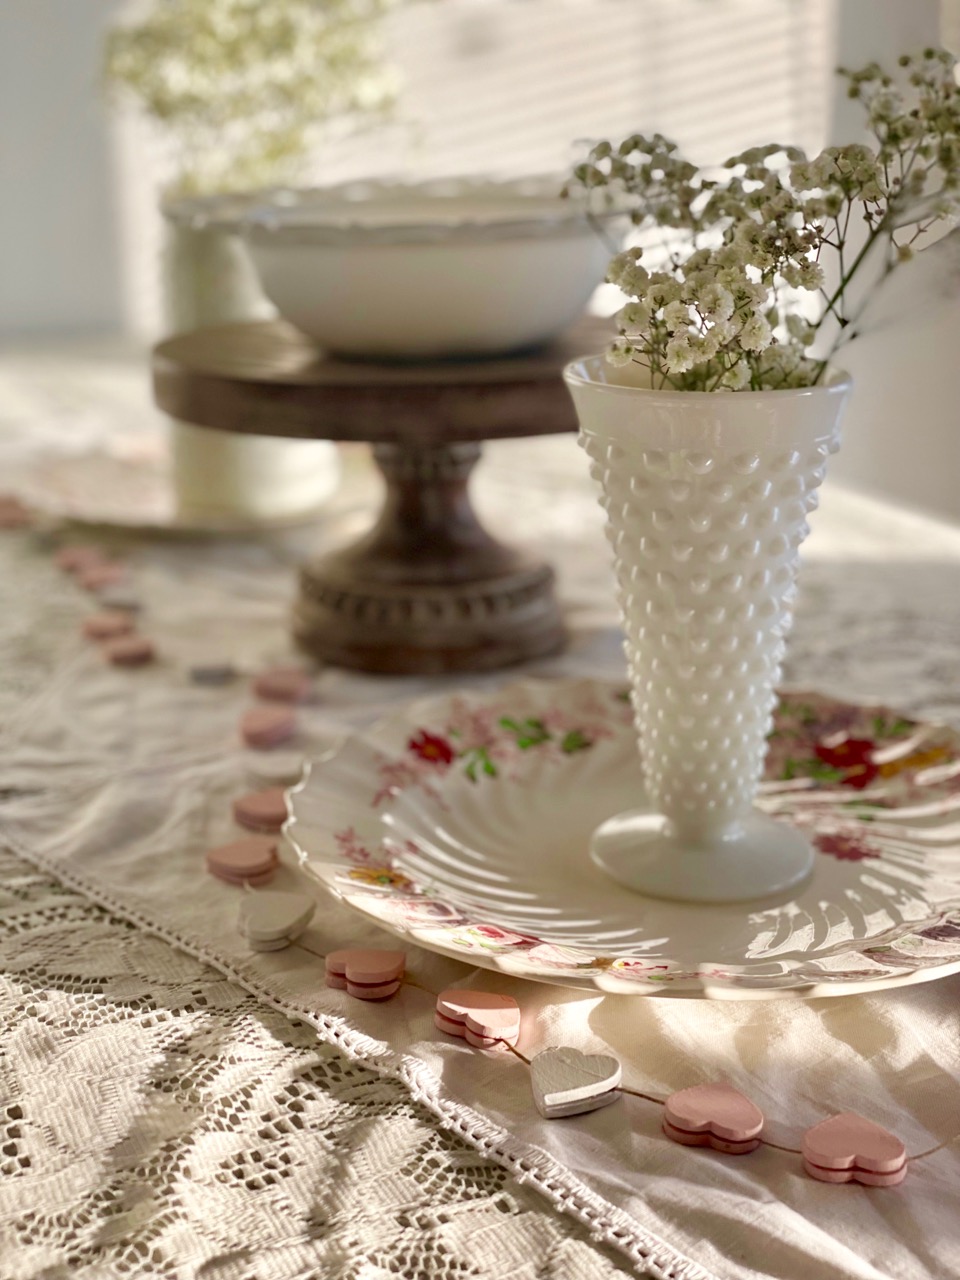 hobnail milk glass used for a centerpiece